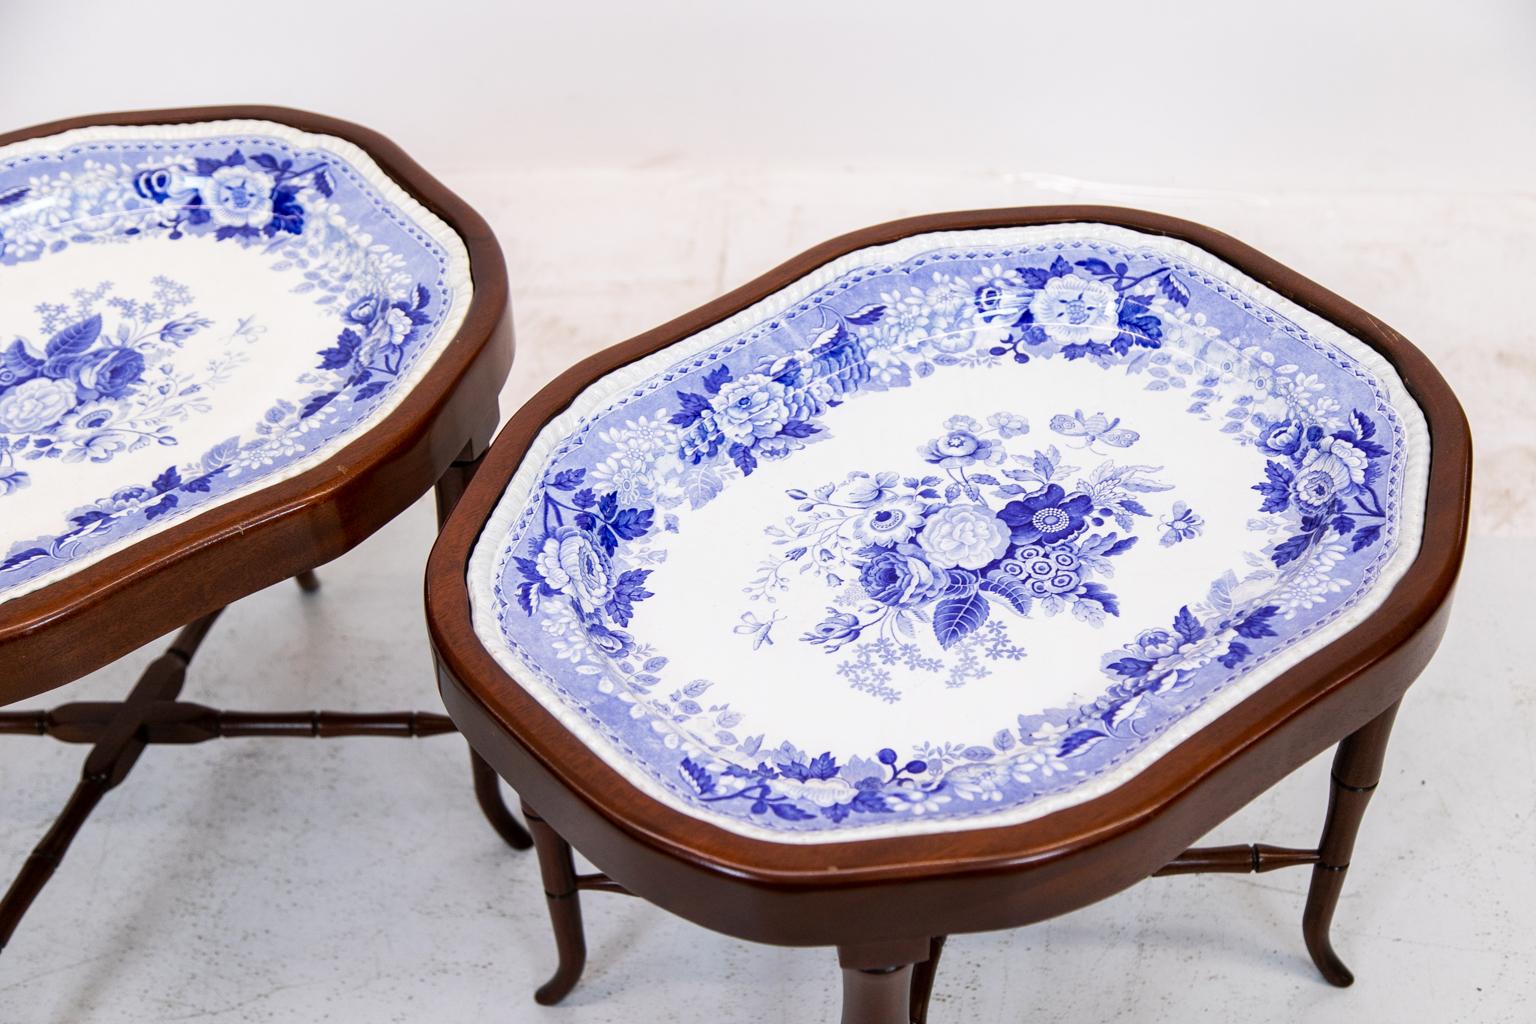 Mid-19th Century Pair of Staffordshire Tray Tables